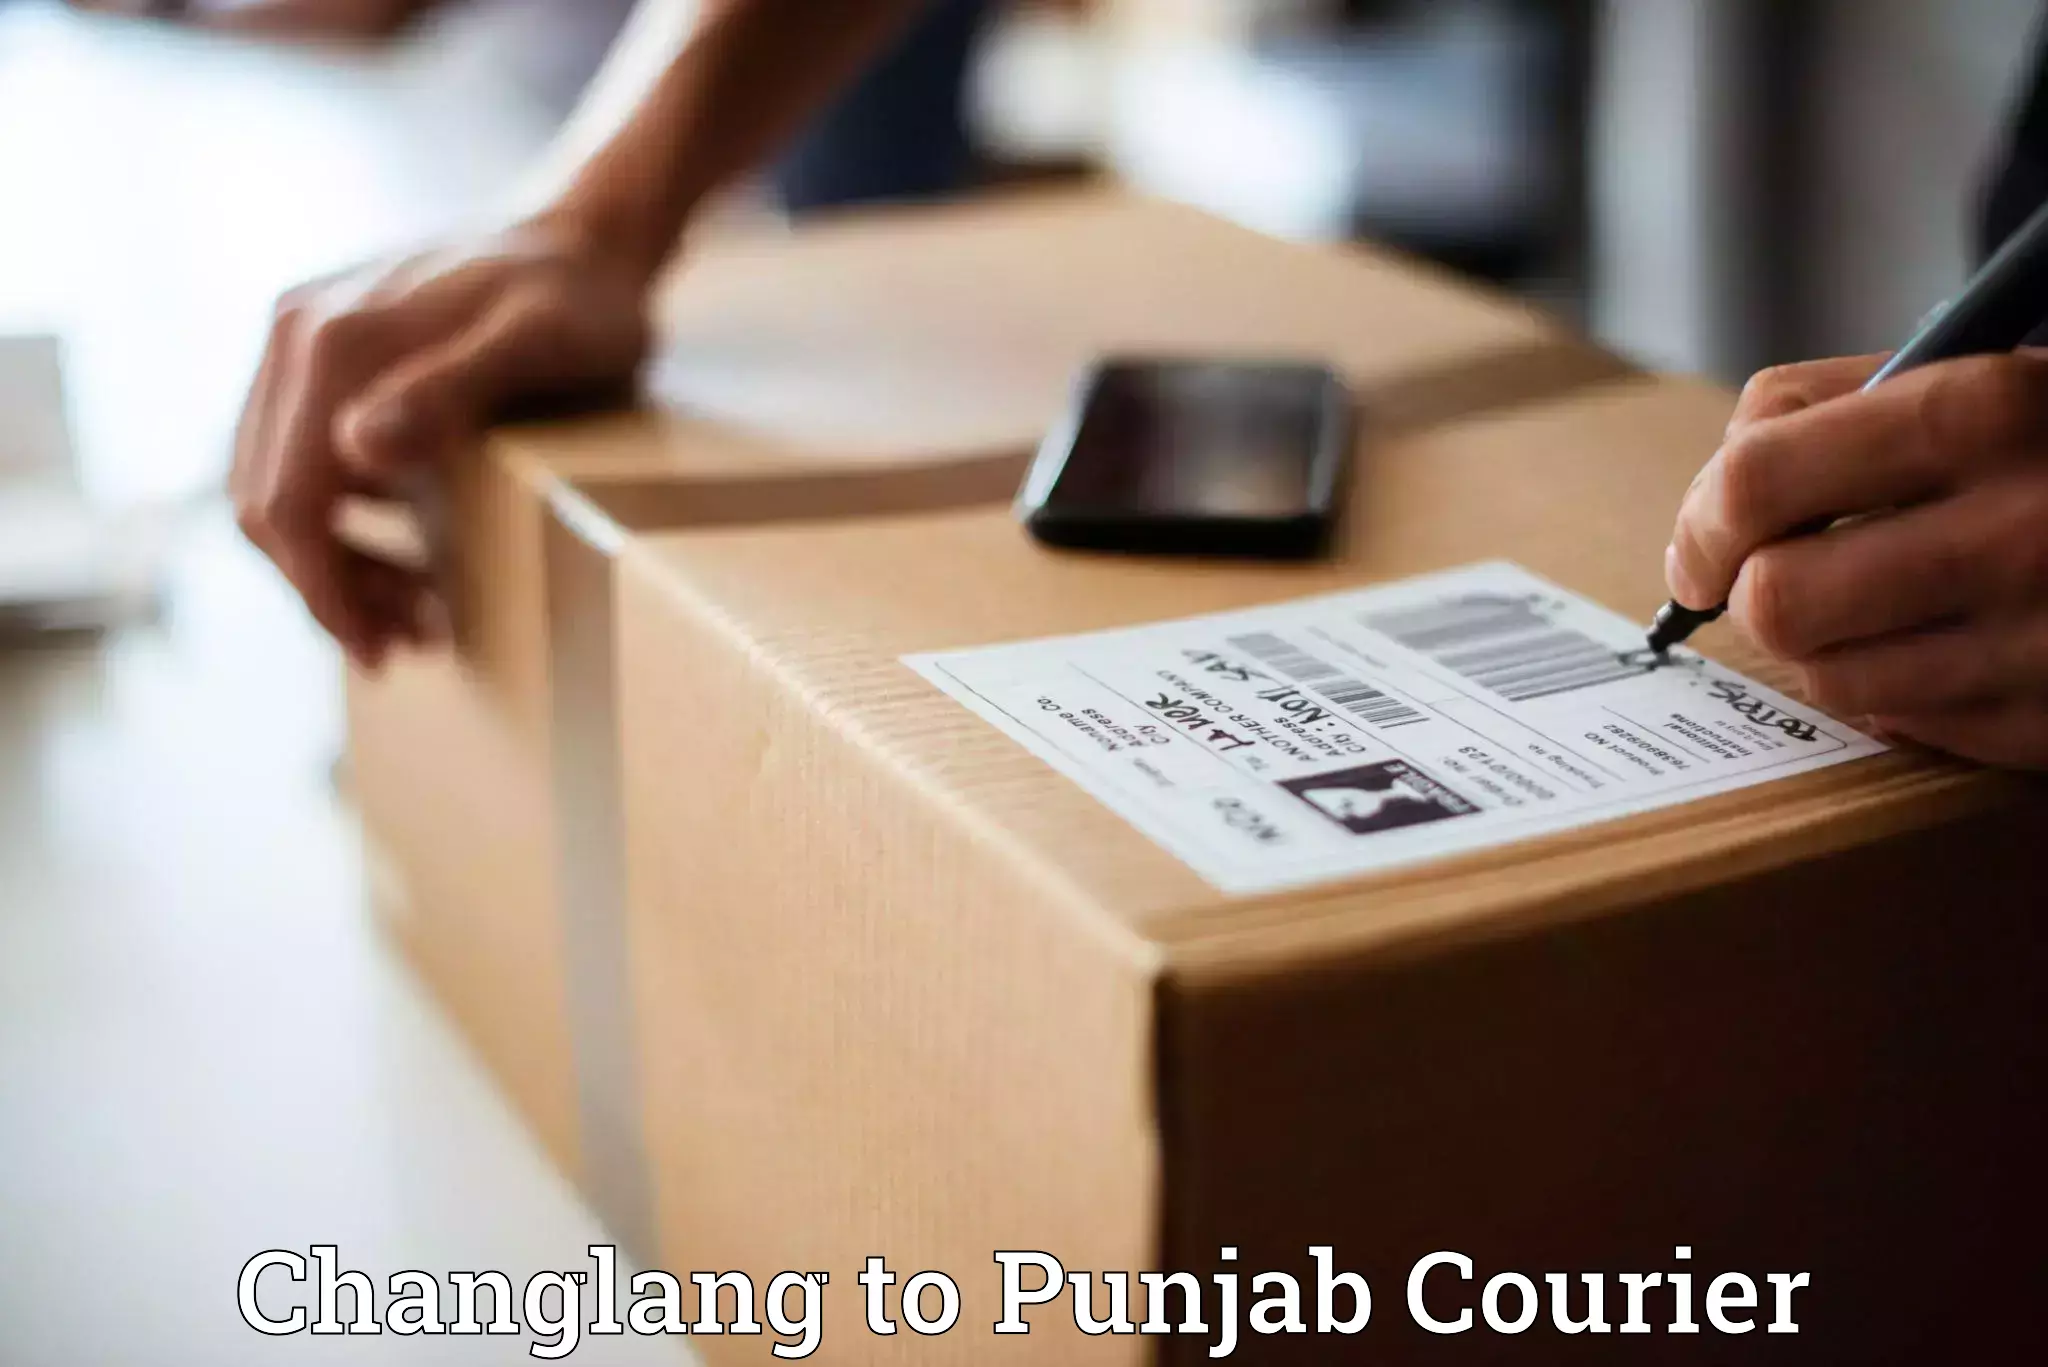 Expedited shipping methods Changlang to Pathankot